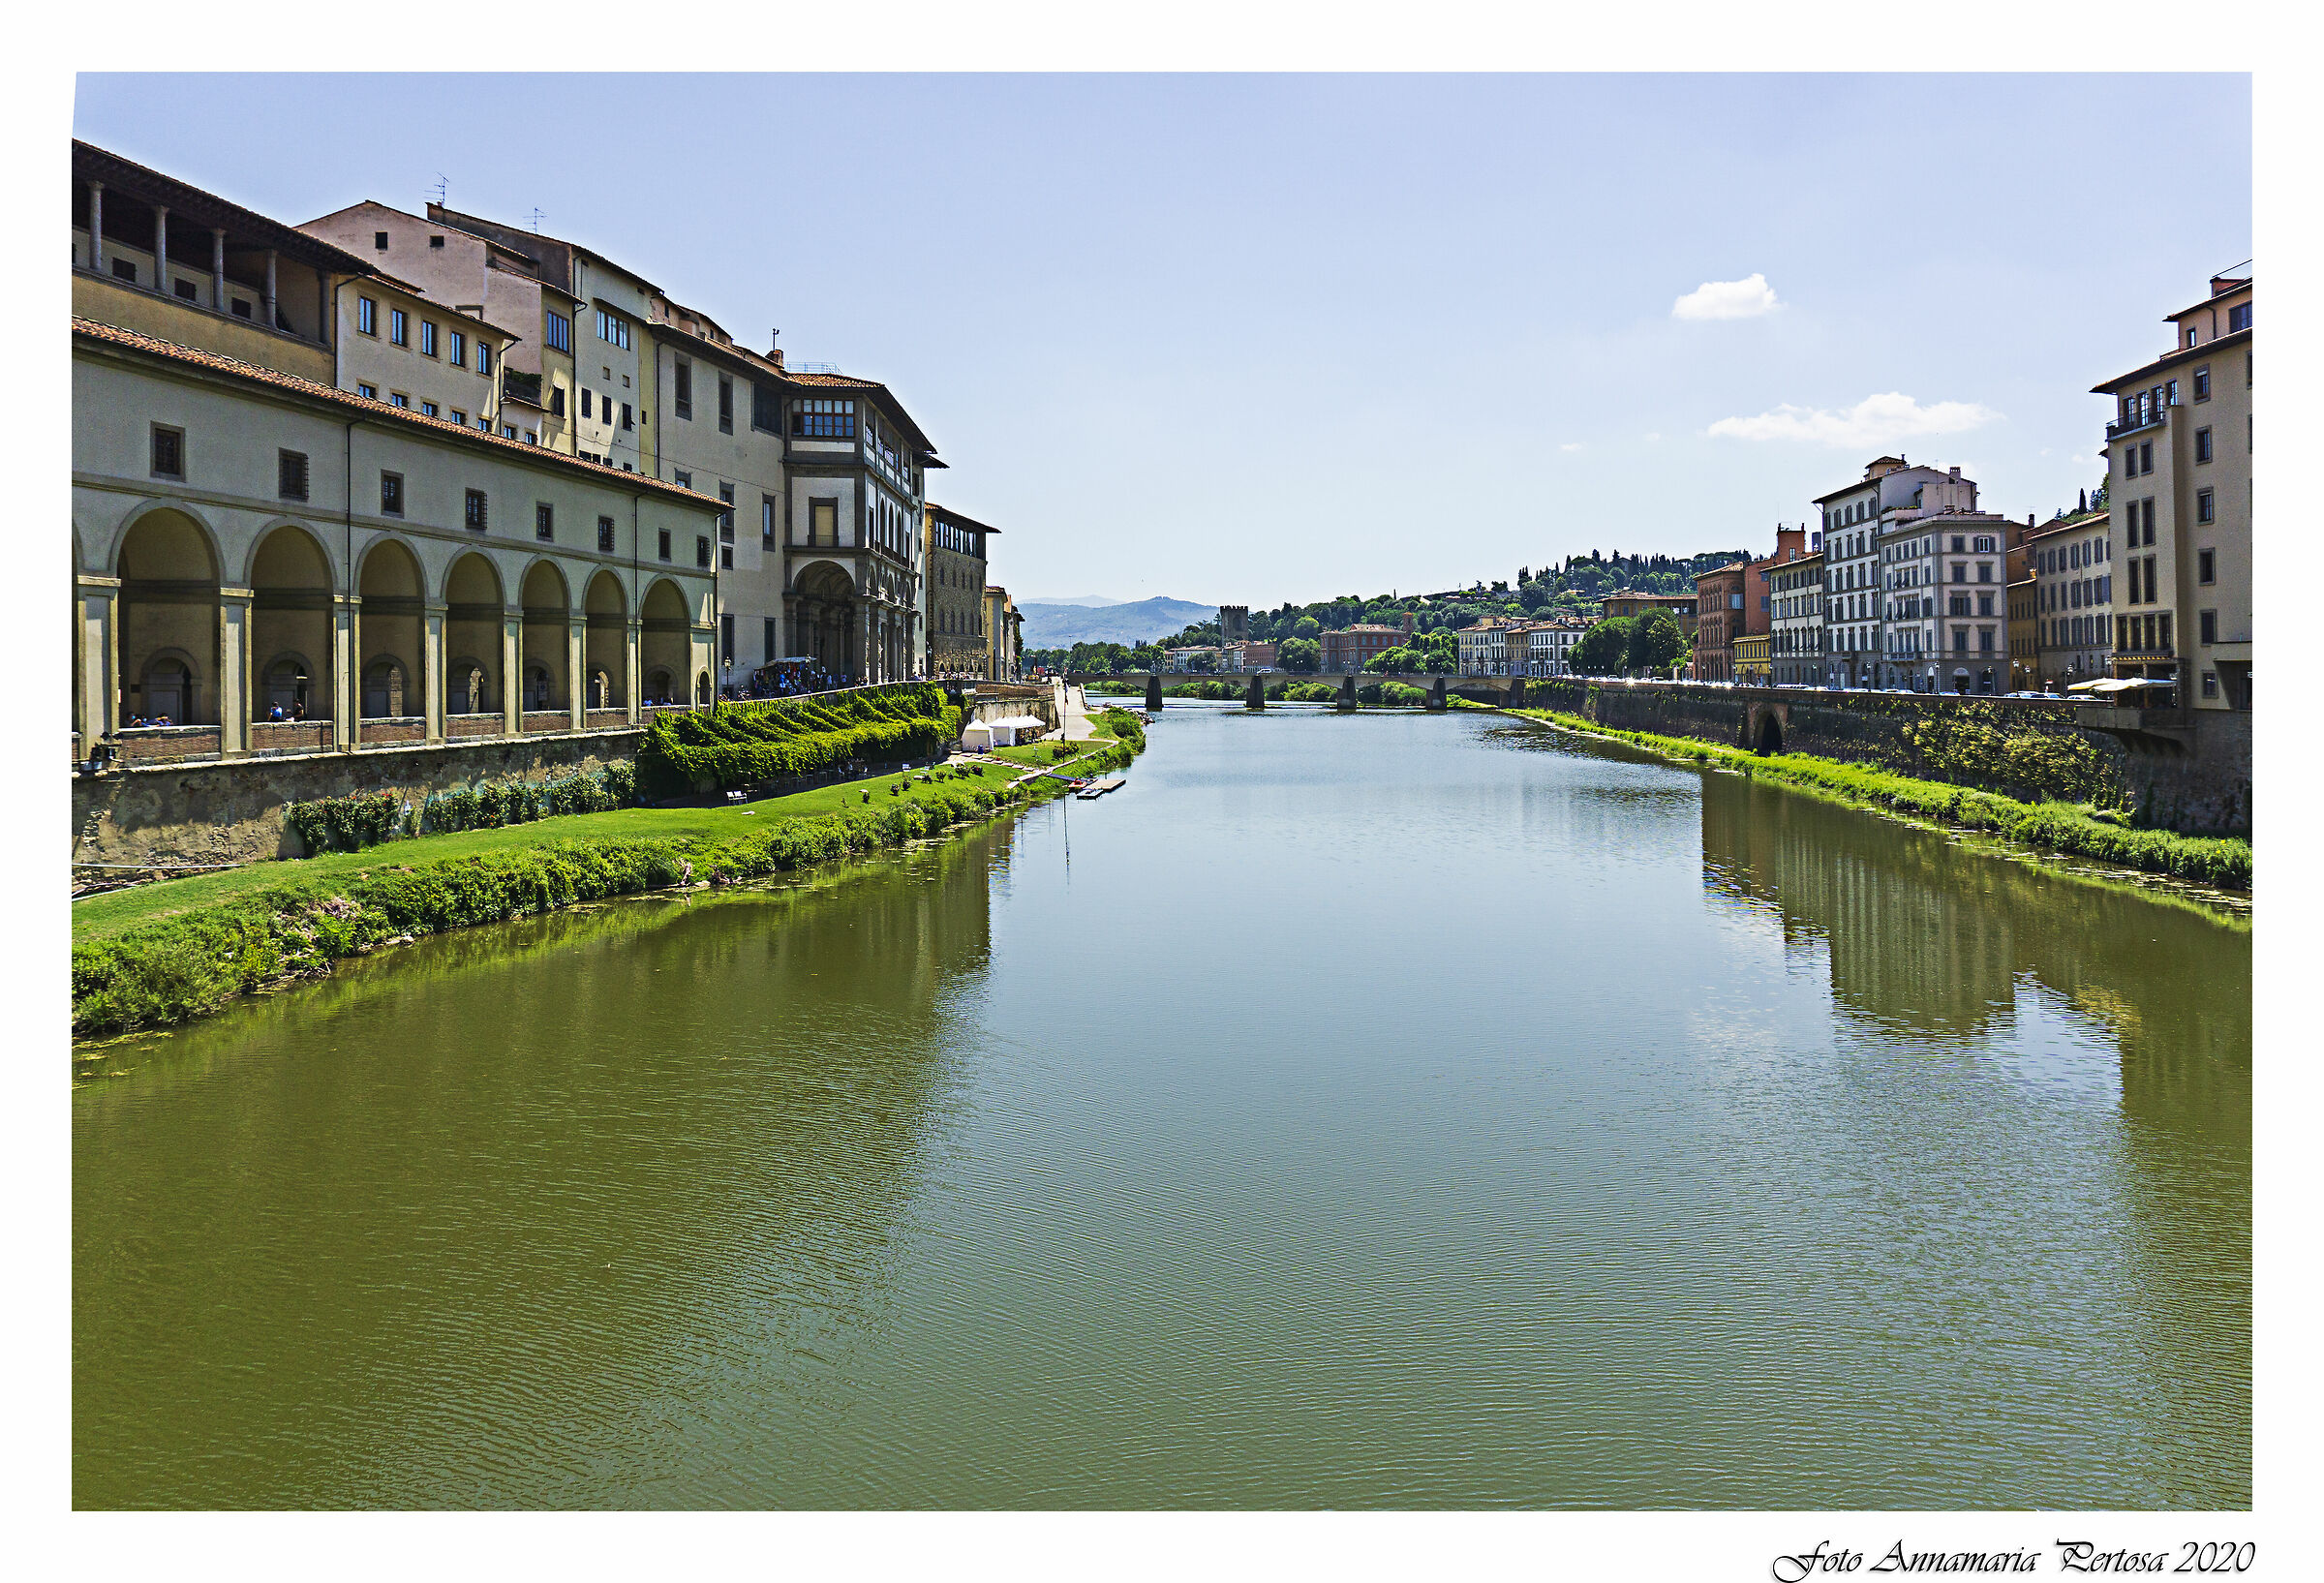 The Arno and its reflections...